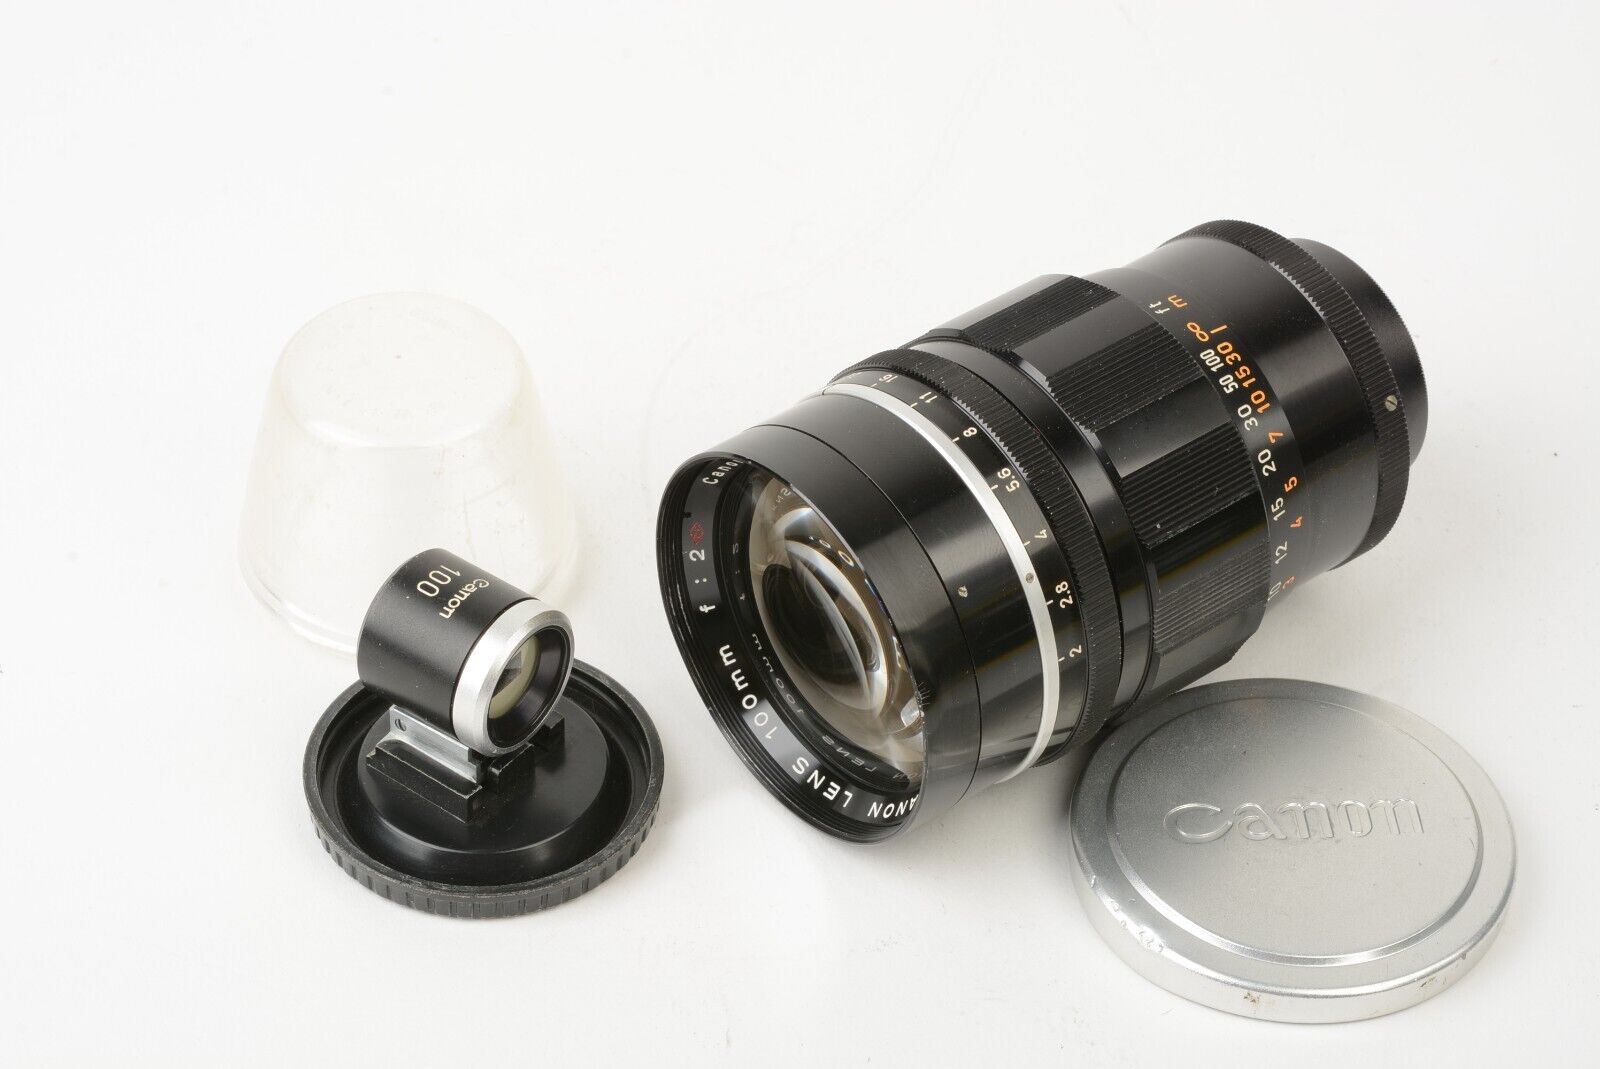 EXC++ CANON 100mm f2 L39 LTM MOUNT LENS w/FINDER IN JEWEL CASE, VERY  CLEAN&SHARP